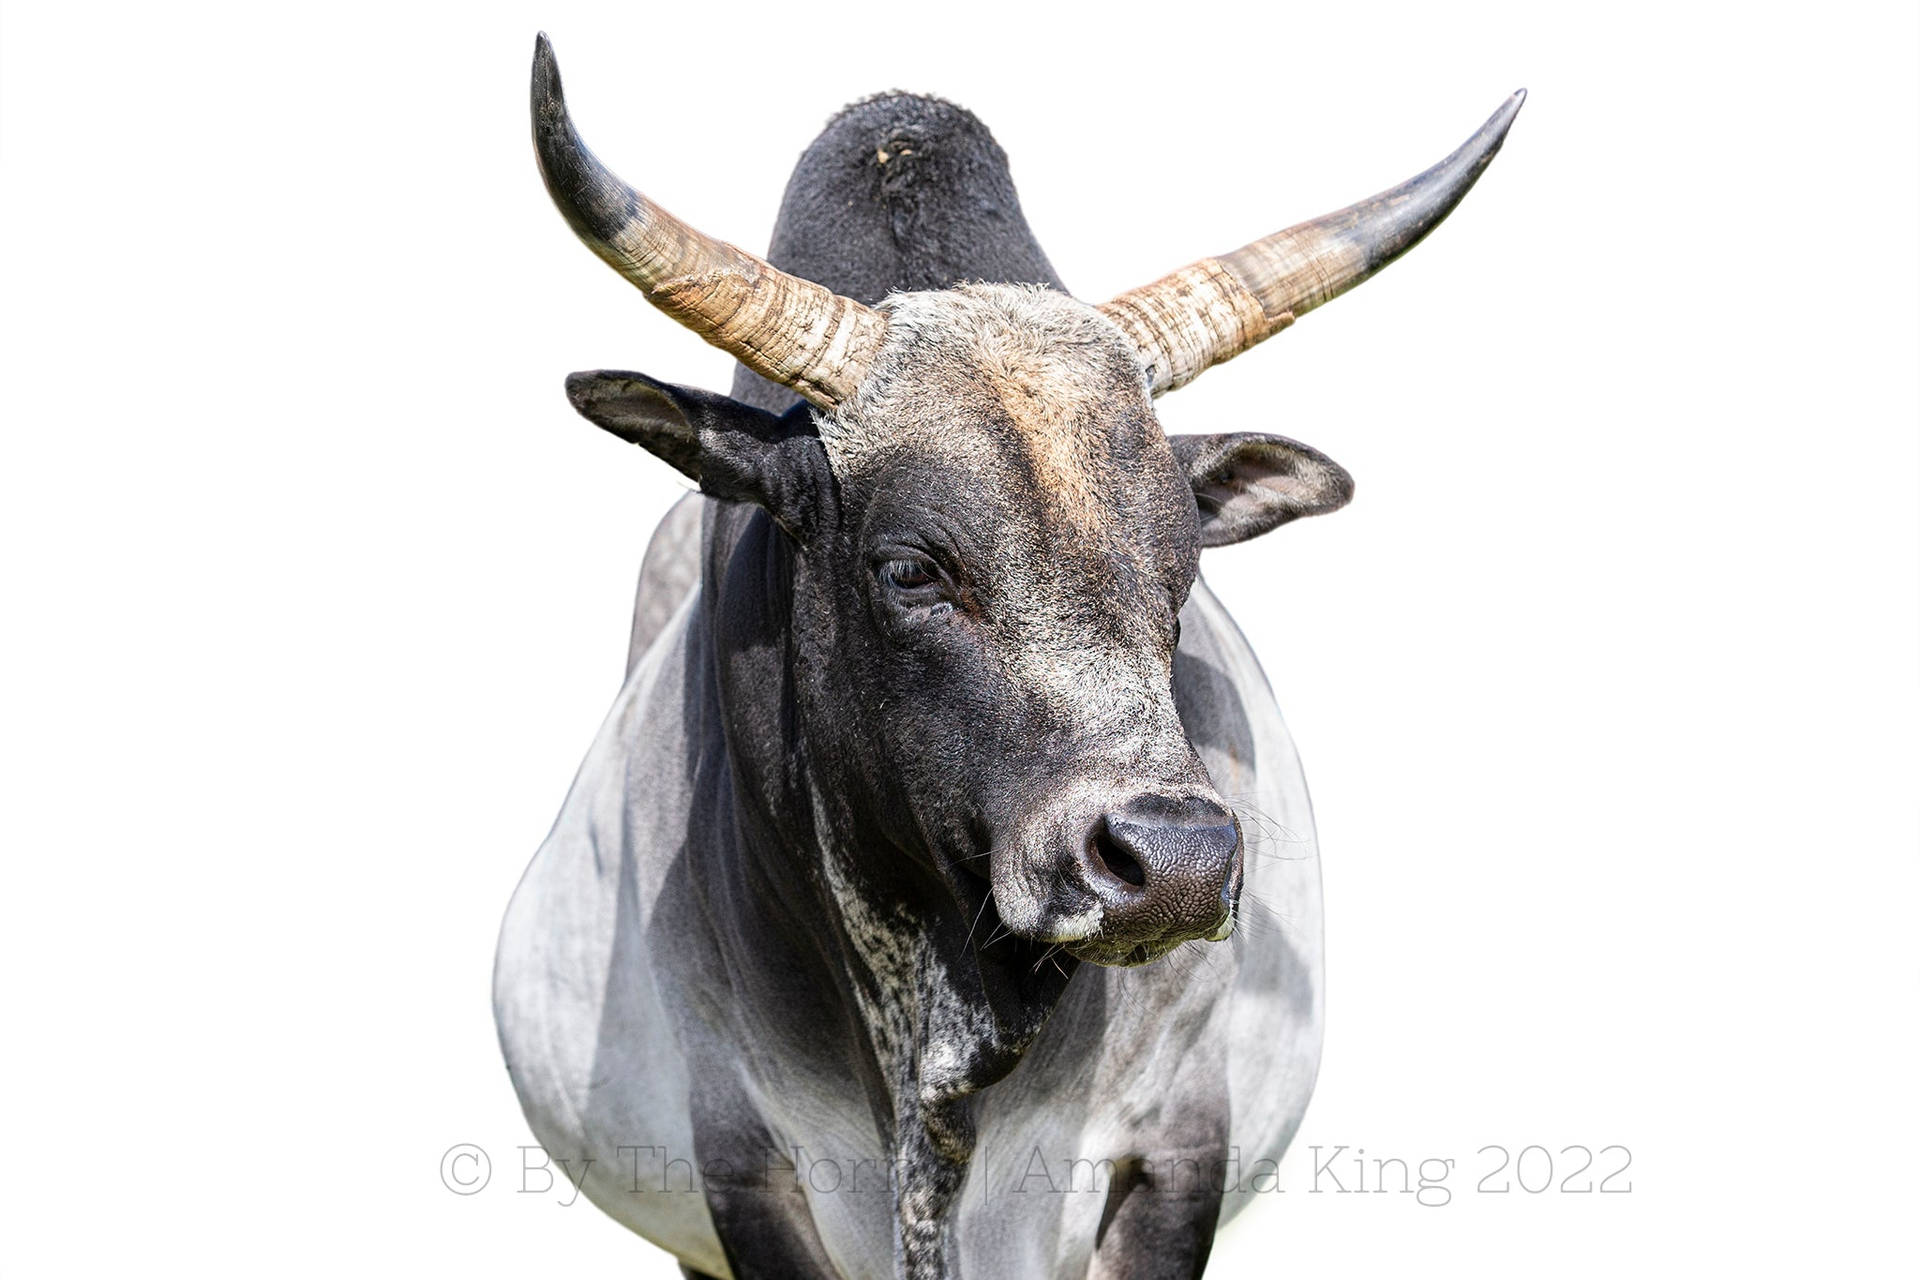 Majestic Zebu Cow with Prominent Horns Wallpaper